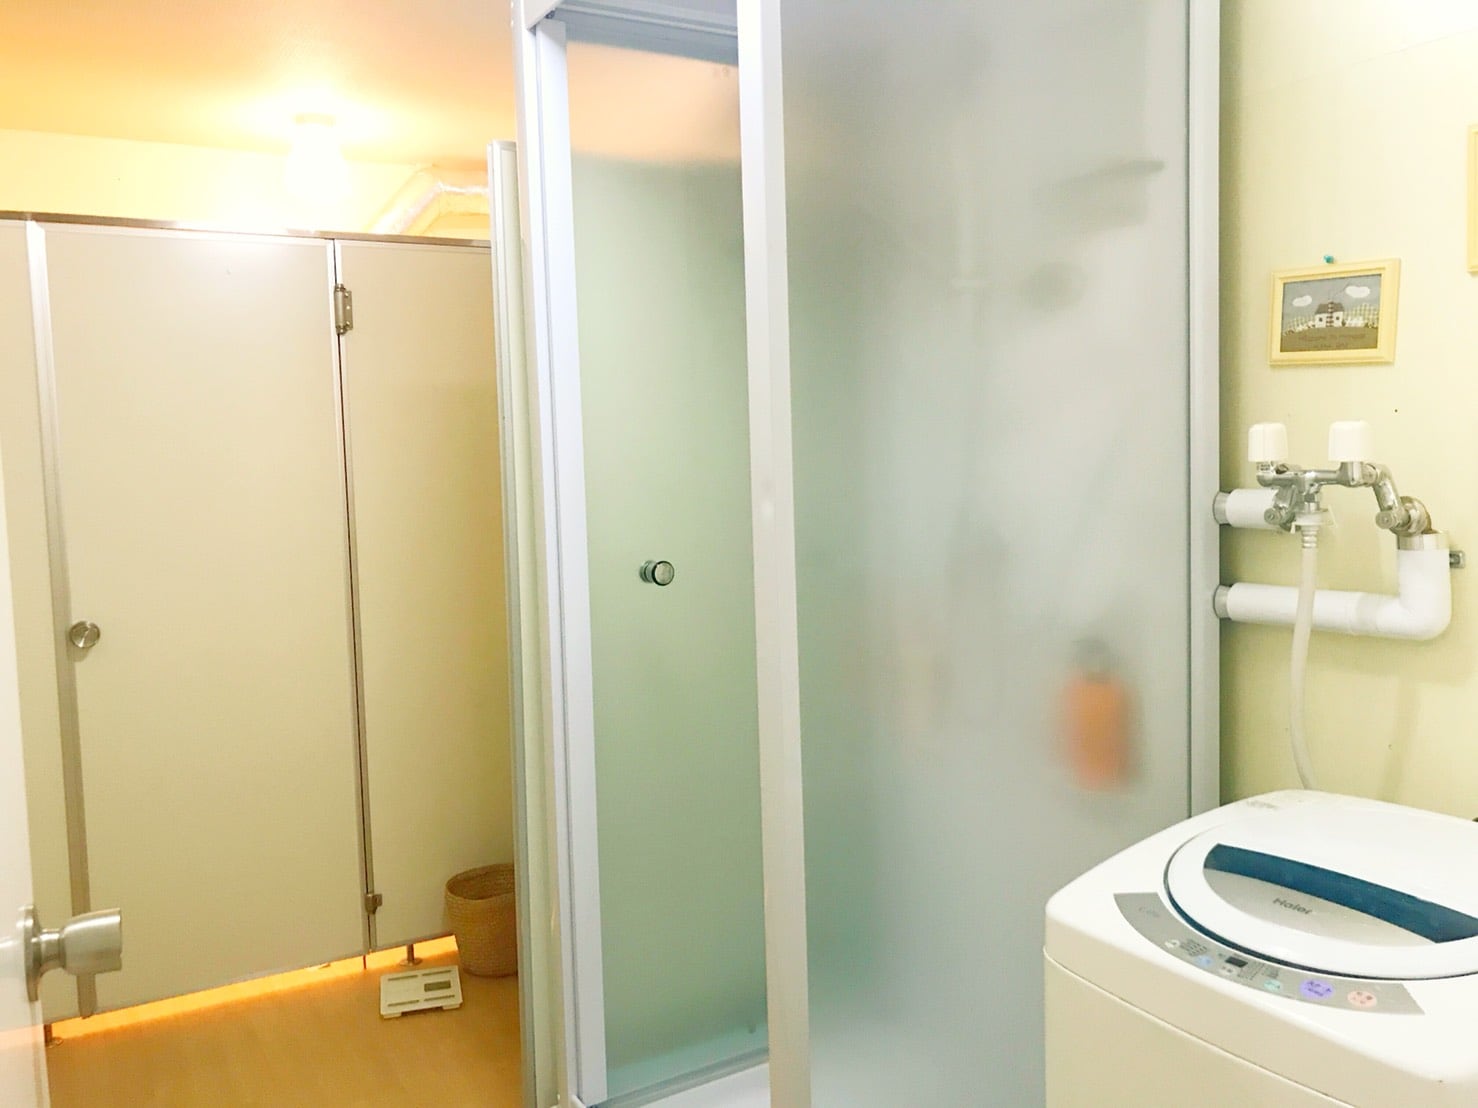 Guest house shared toilet / shower